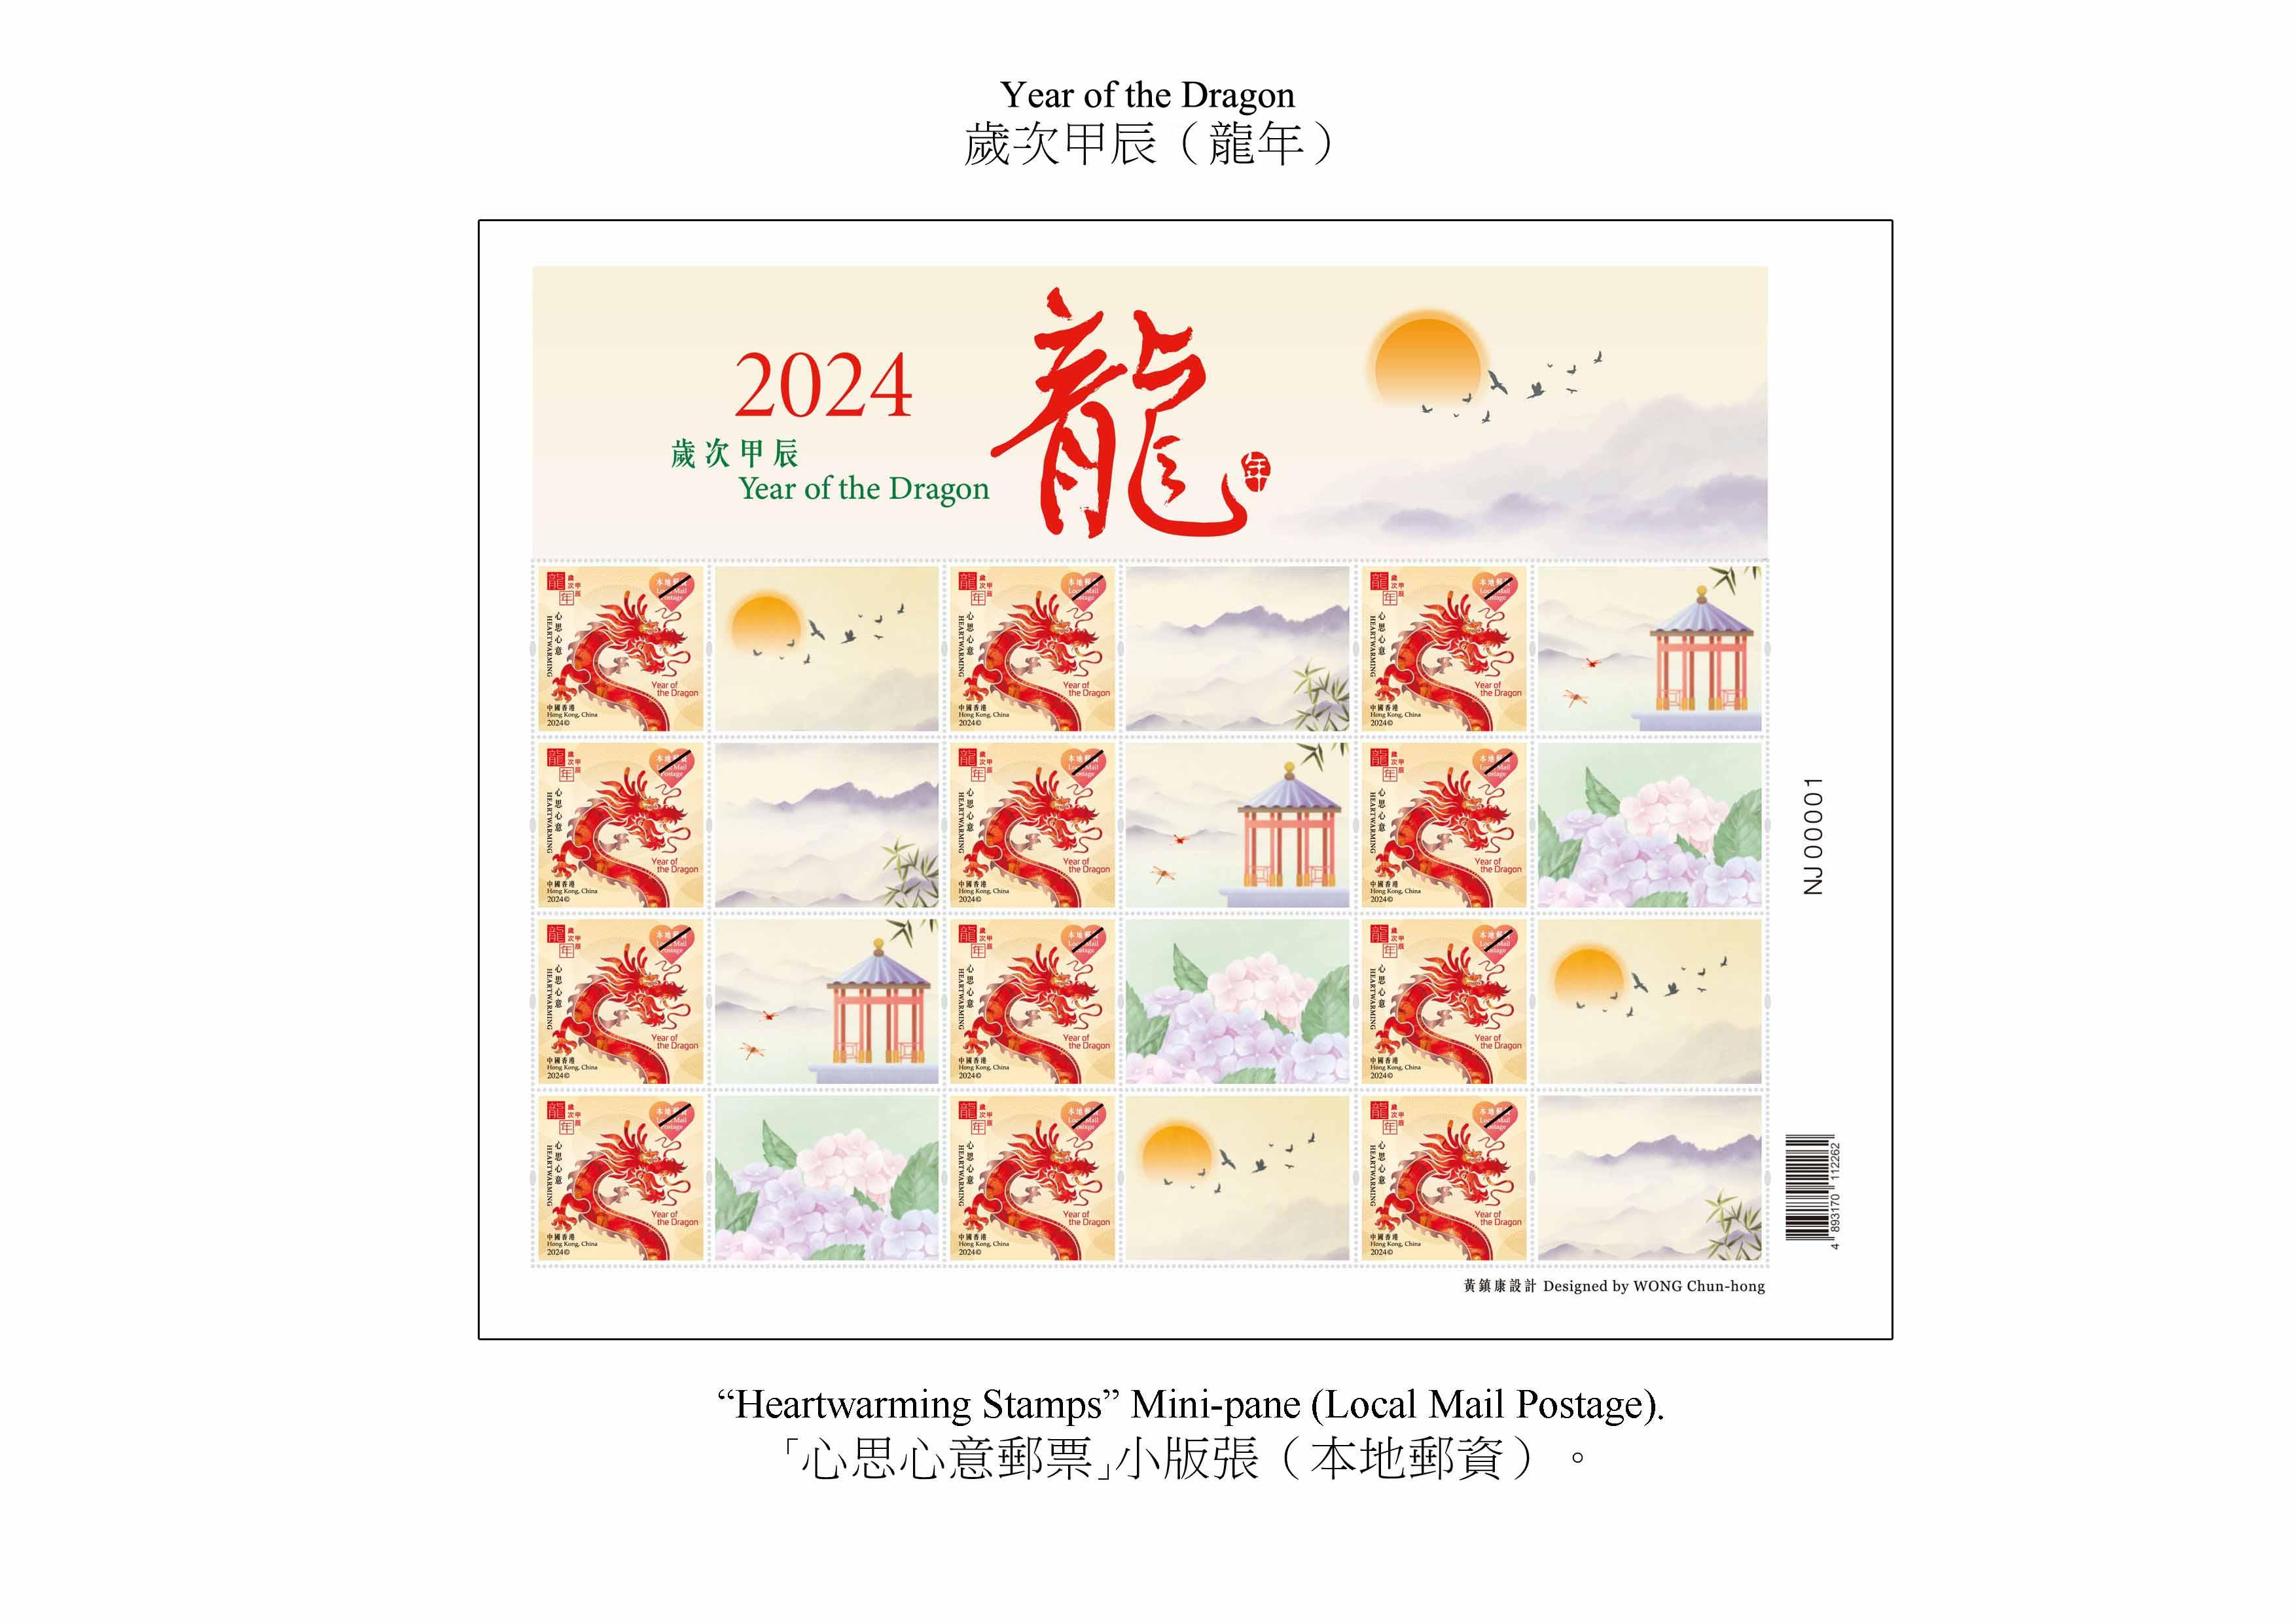 Hongkong Post will launch a special stamp issue and associated philatelic products on the theme of "Year of the Dragon" on January 5, 2024 (Friday). Photo shows the "Heartwarming Stamps" mini-pane (local mail postage).
